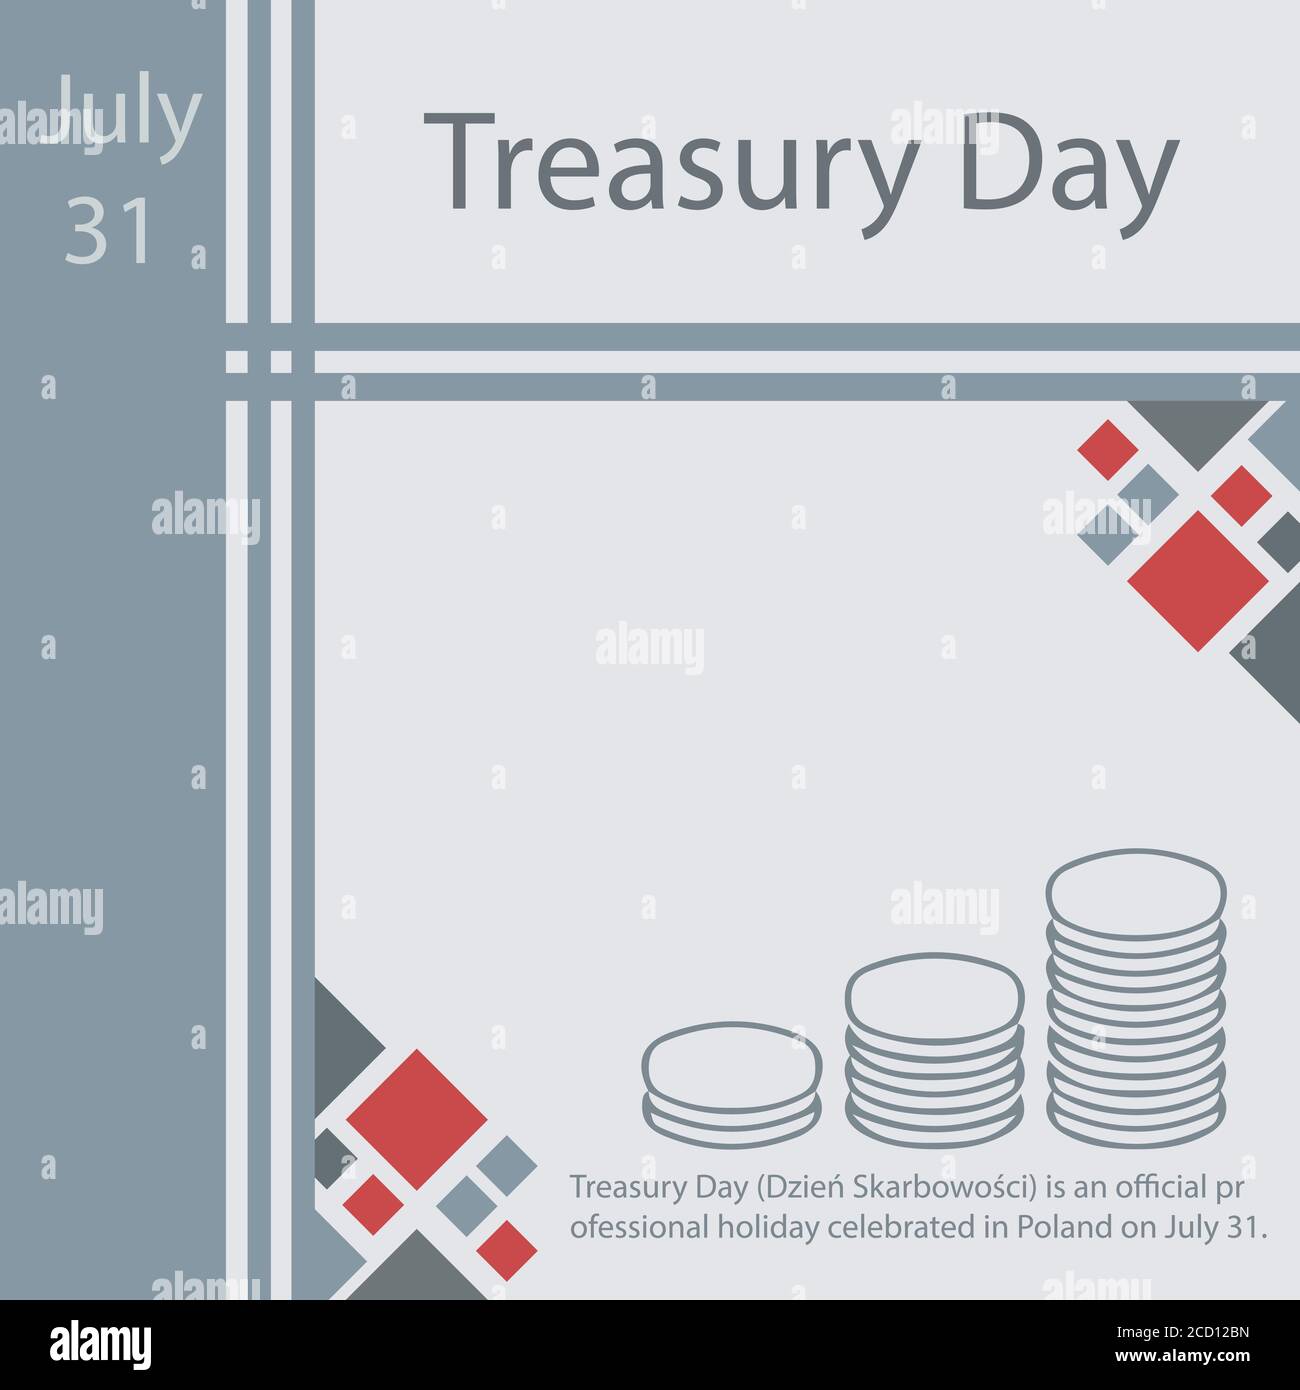 Treasury Day is an official professional holiday celebrated in Poland on July 31. Stock Vector